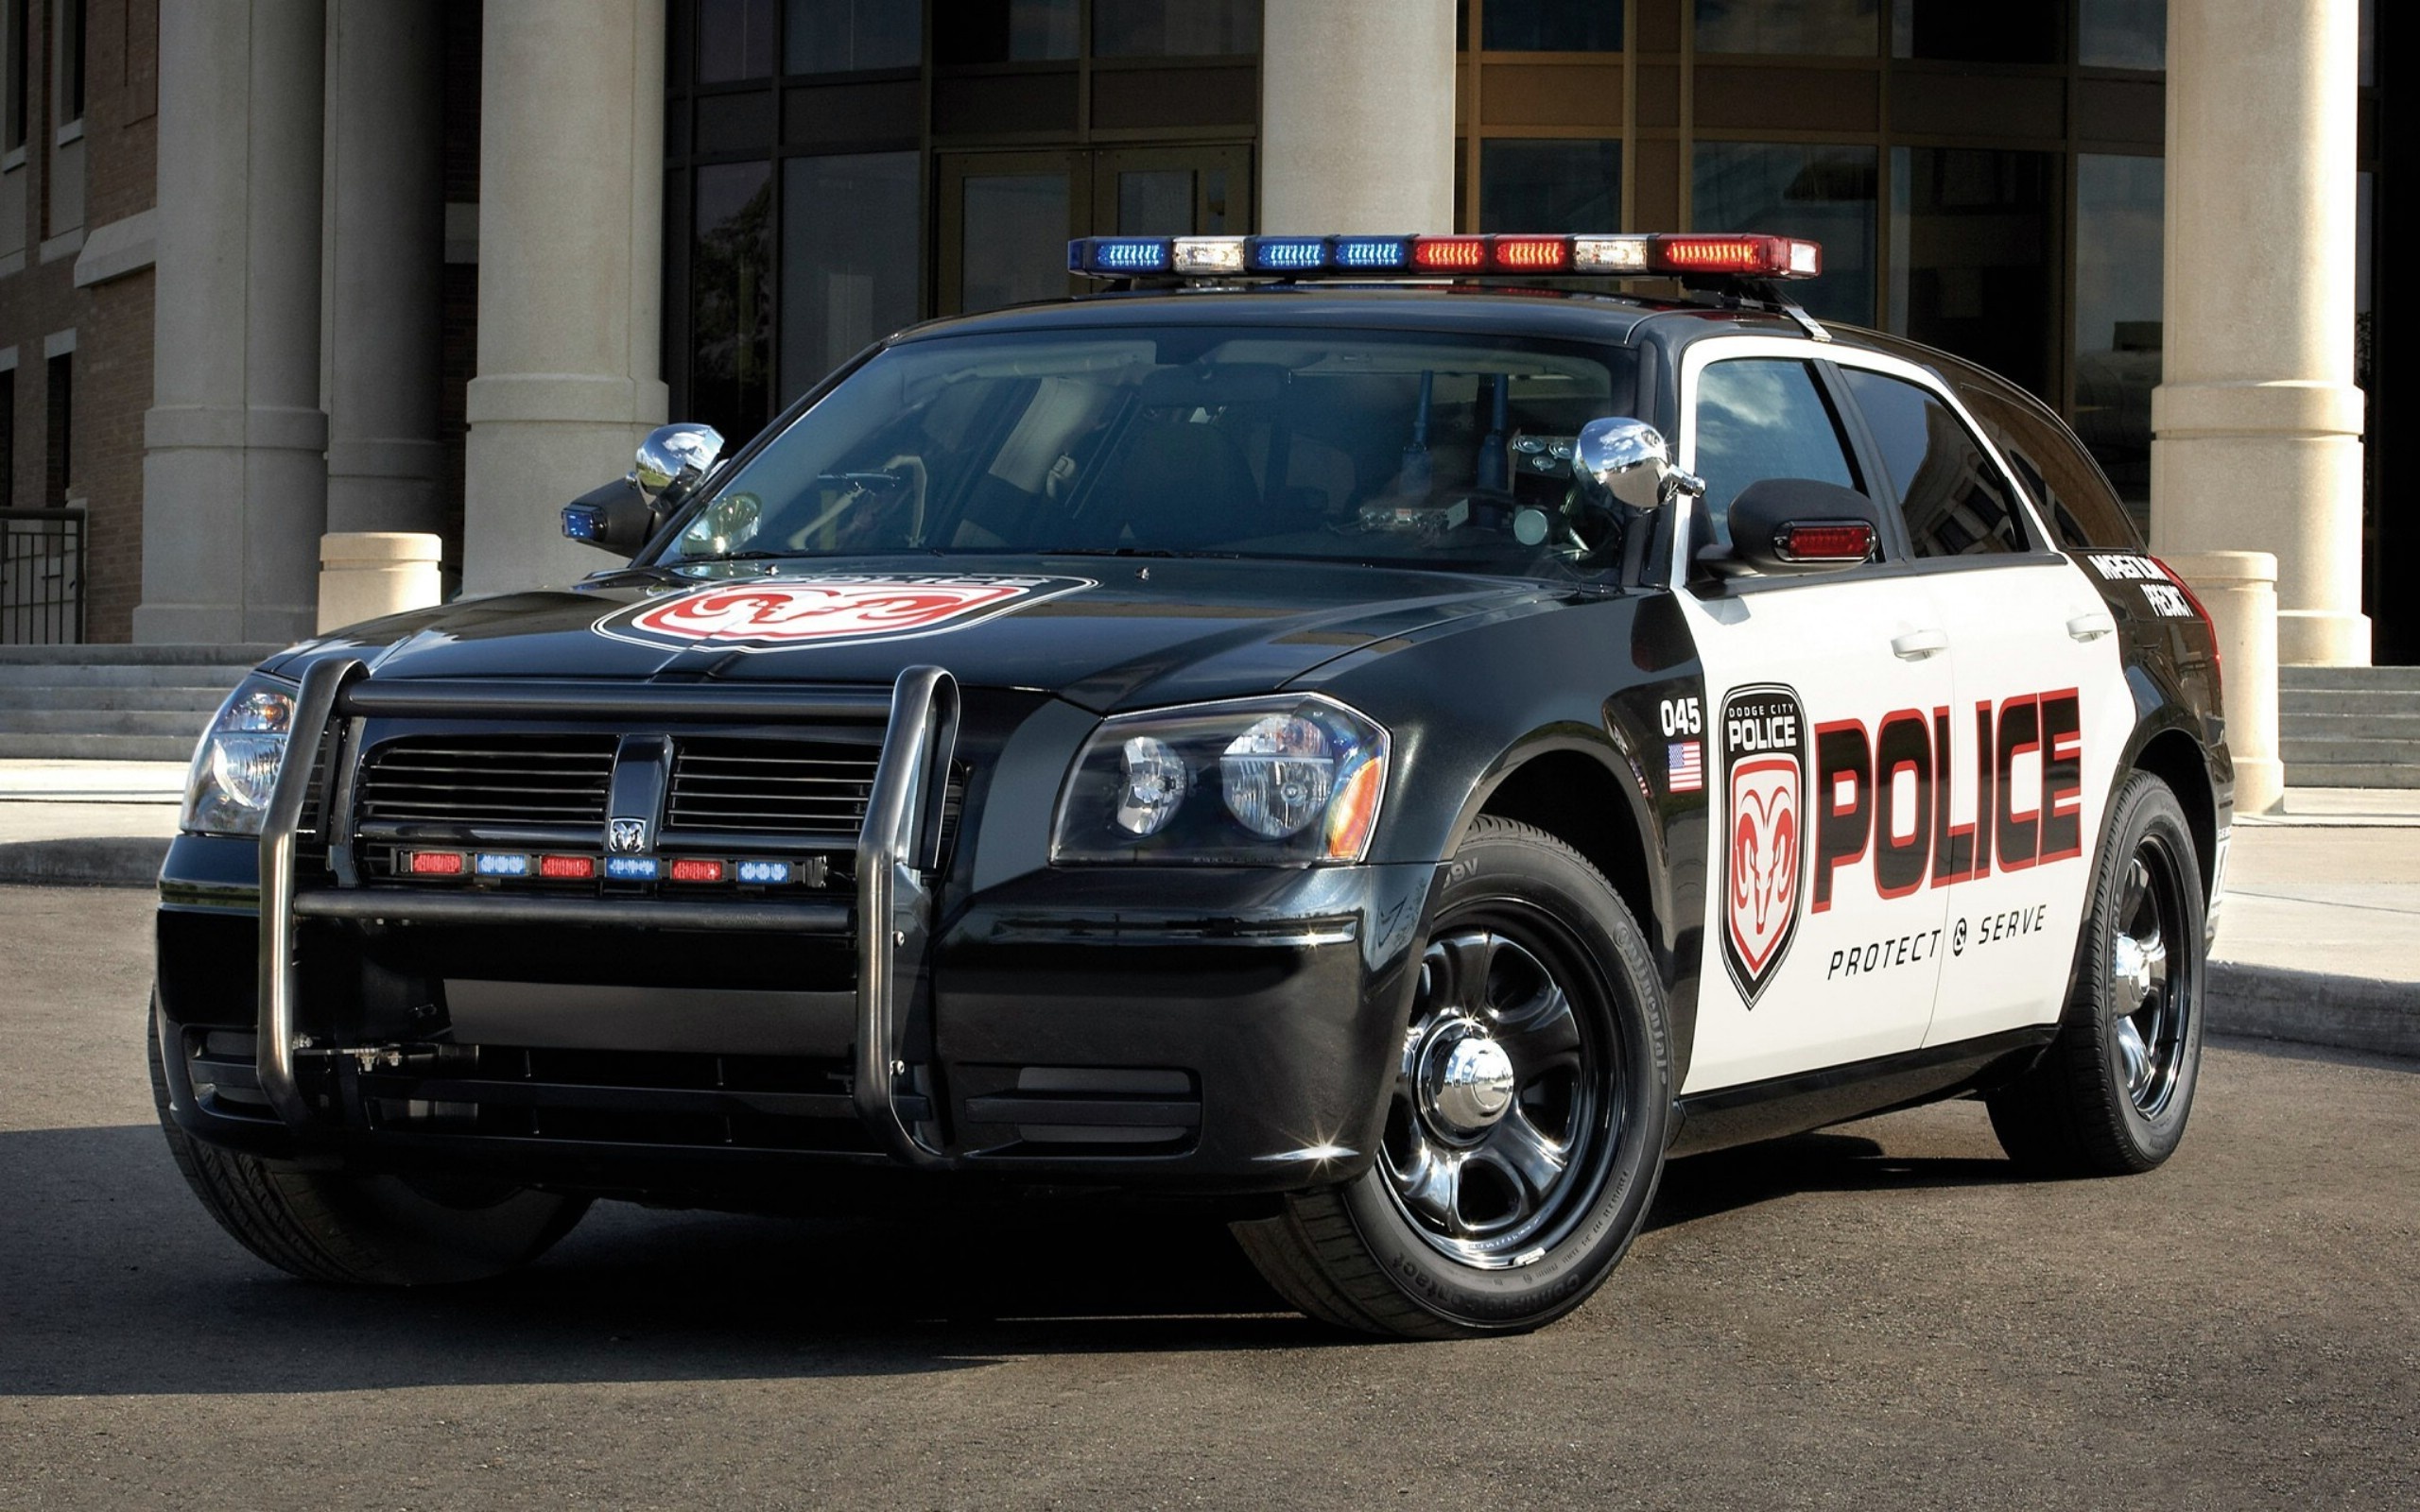 2560 X 1600 Police Car HD Cars,NEW,hd Wallpapers,car,police Wallpaper